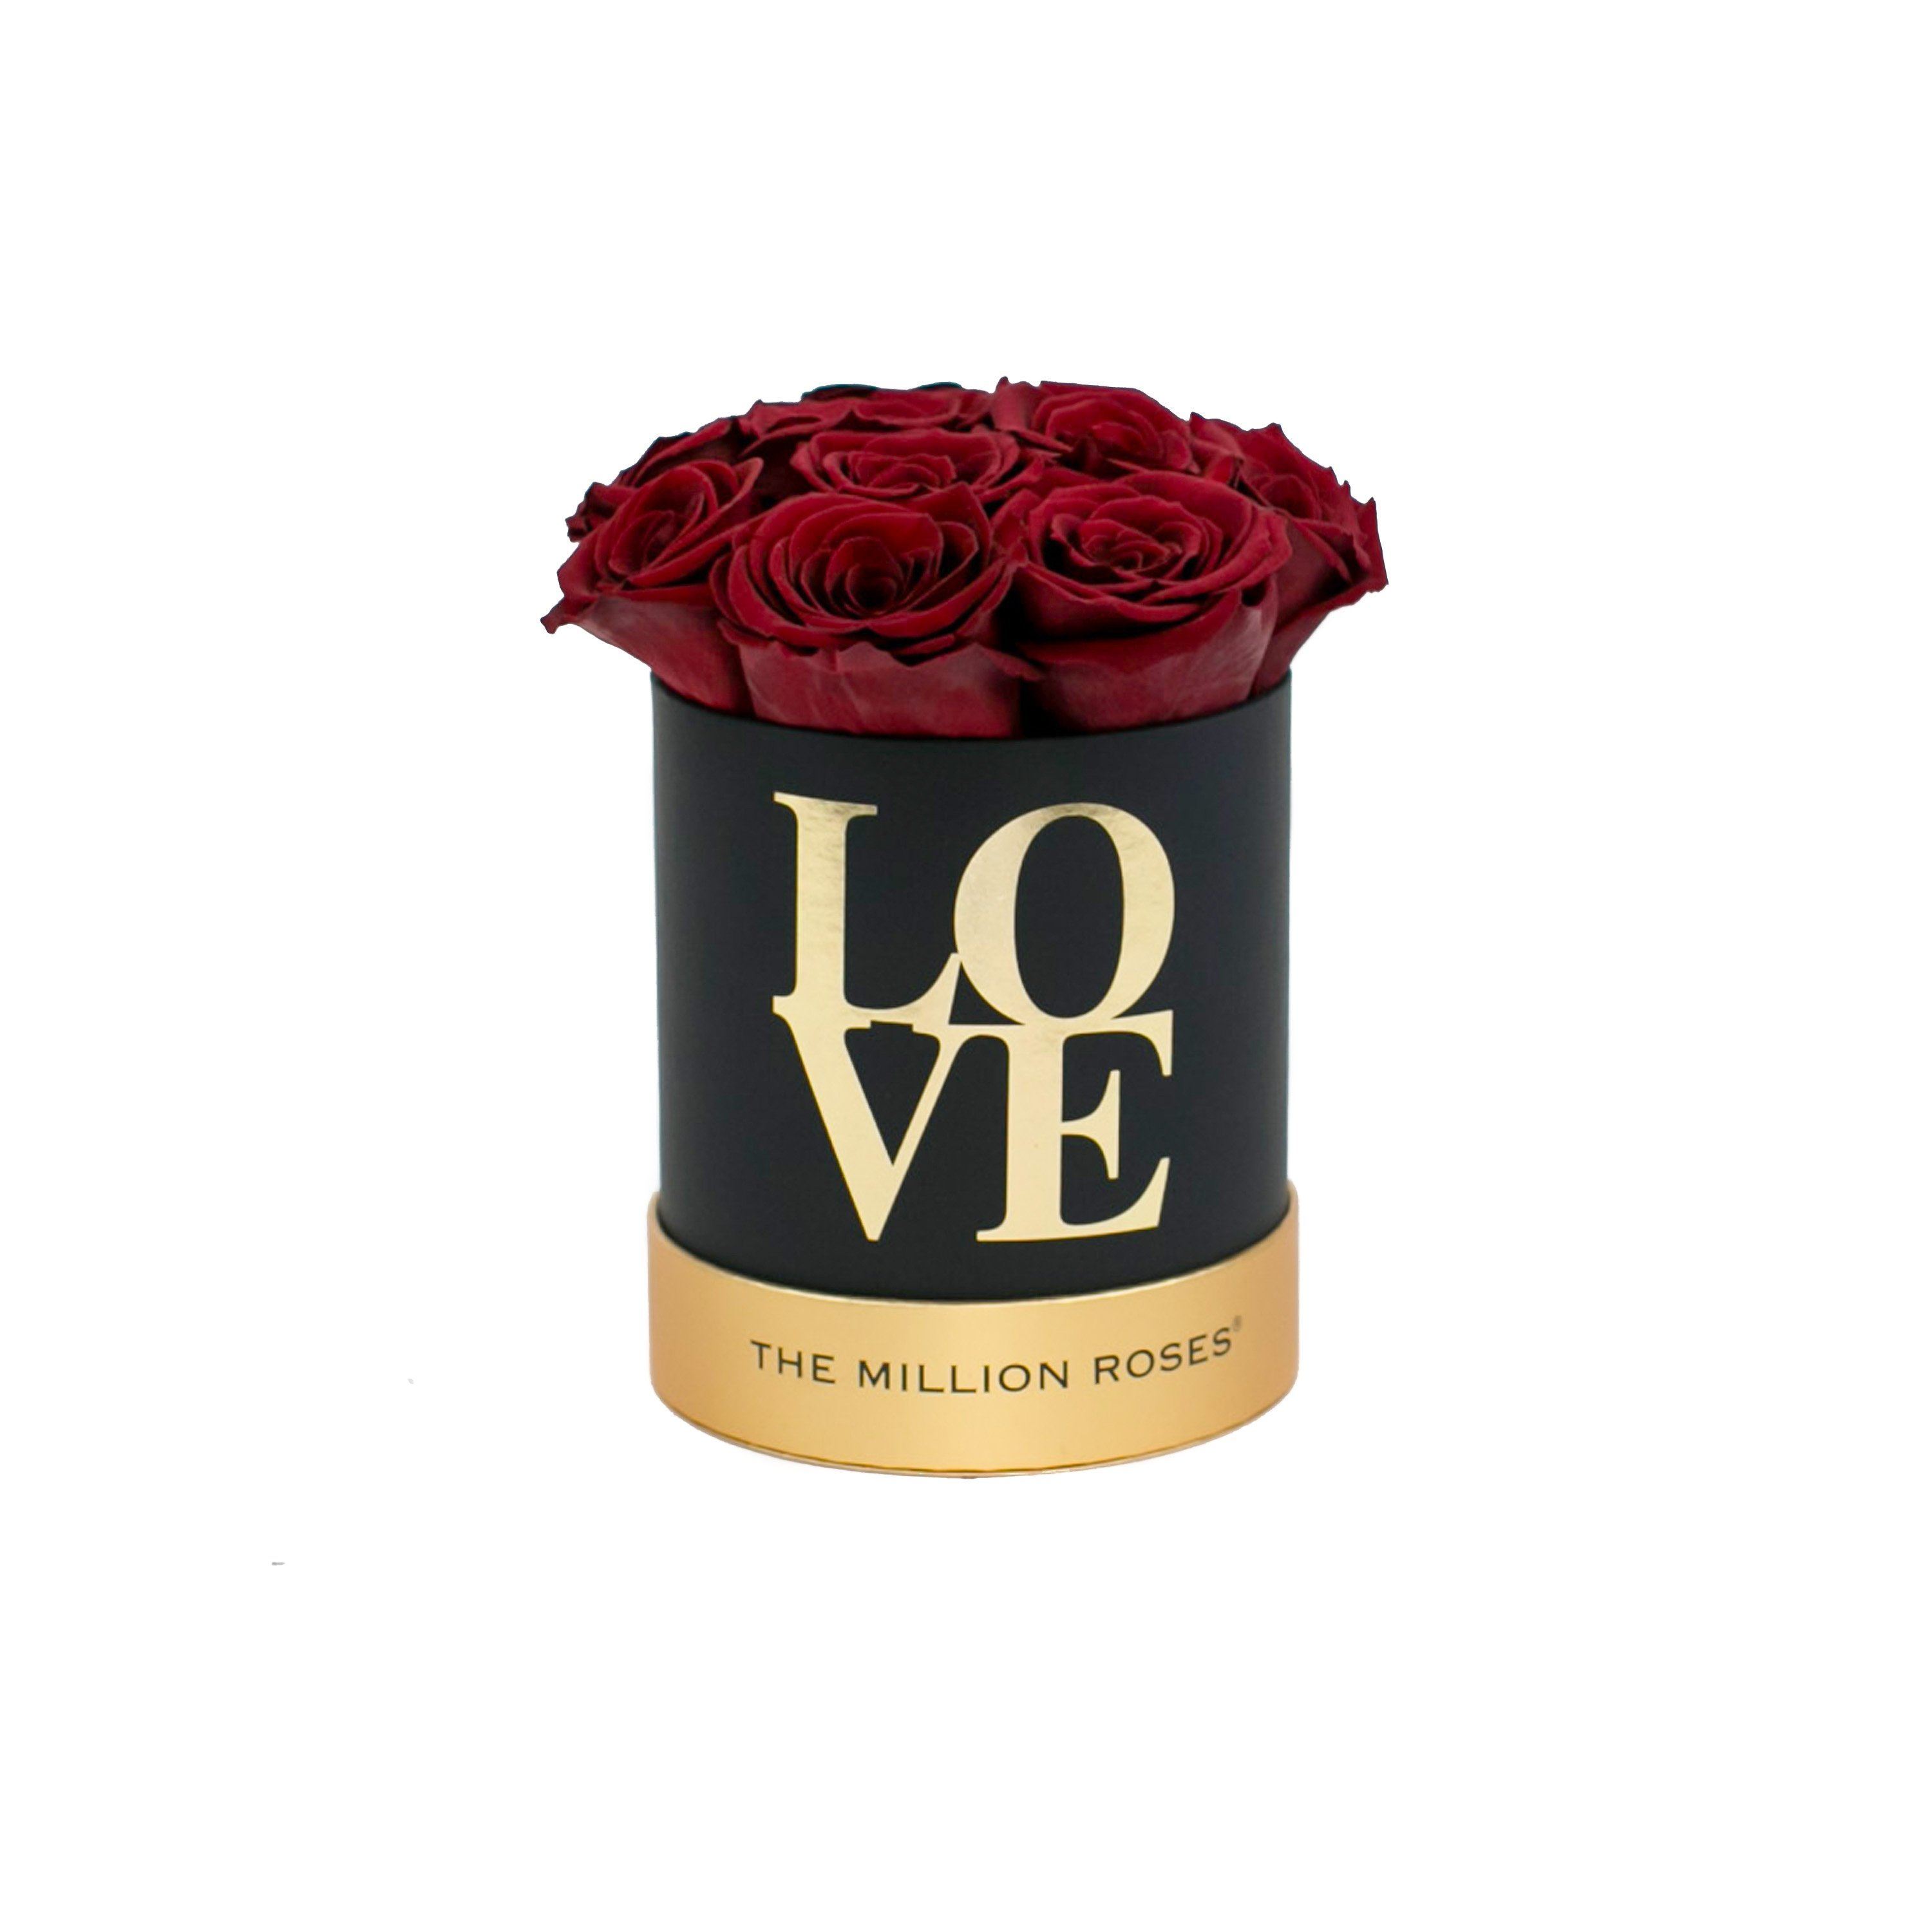 the million basic+ box - "Love Collection" limited edition "LOVE" red eternity roses - the million roses